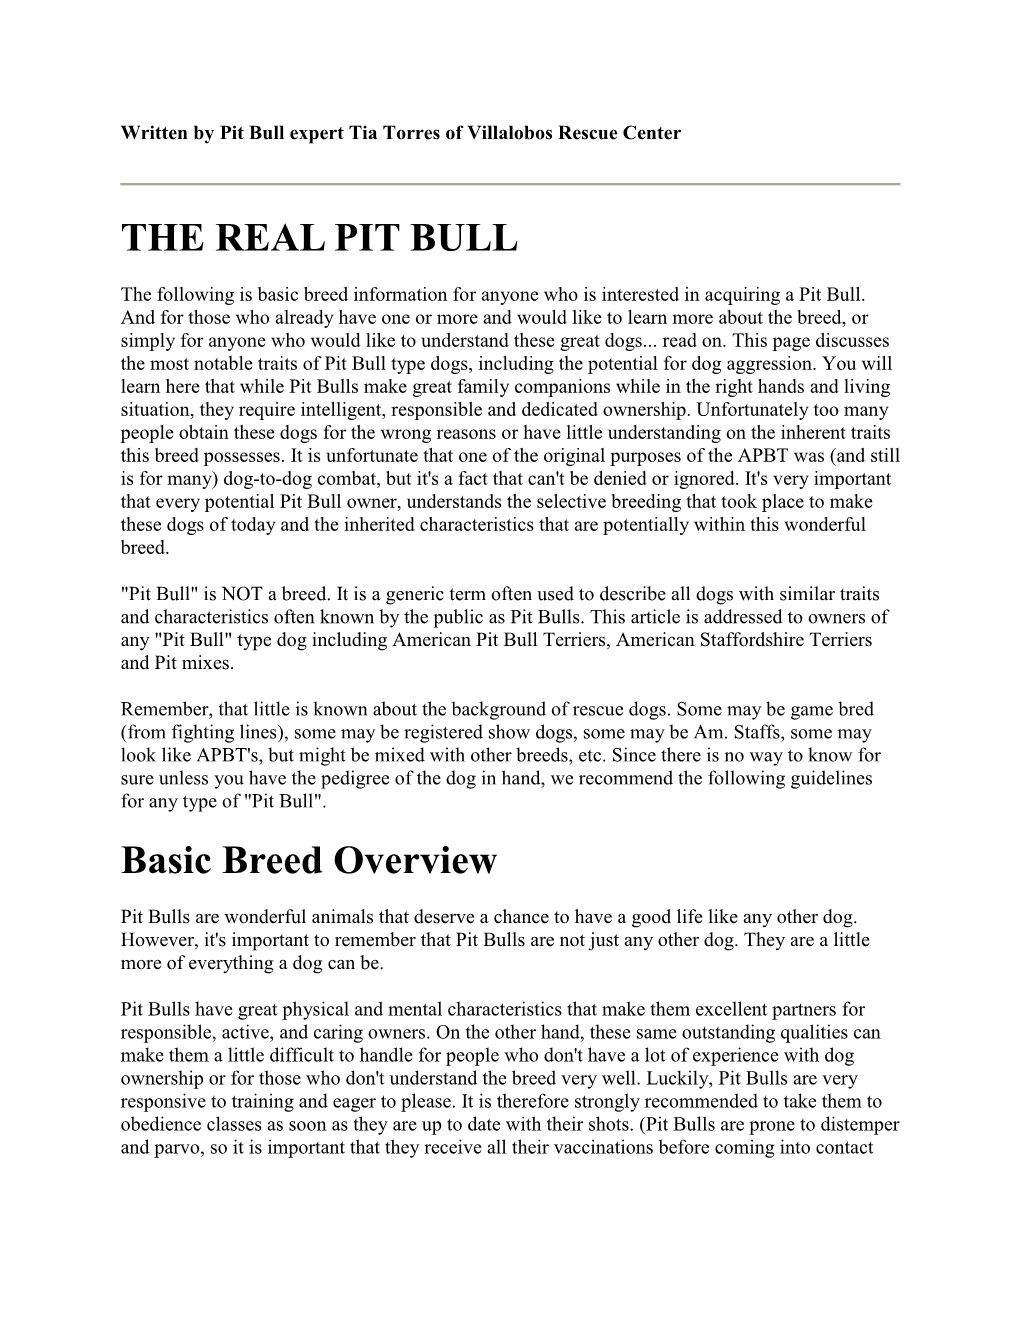 THE REAL PIT BULL Basic Breed Overview